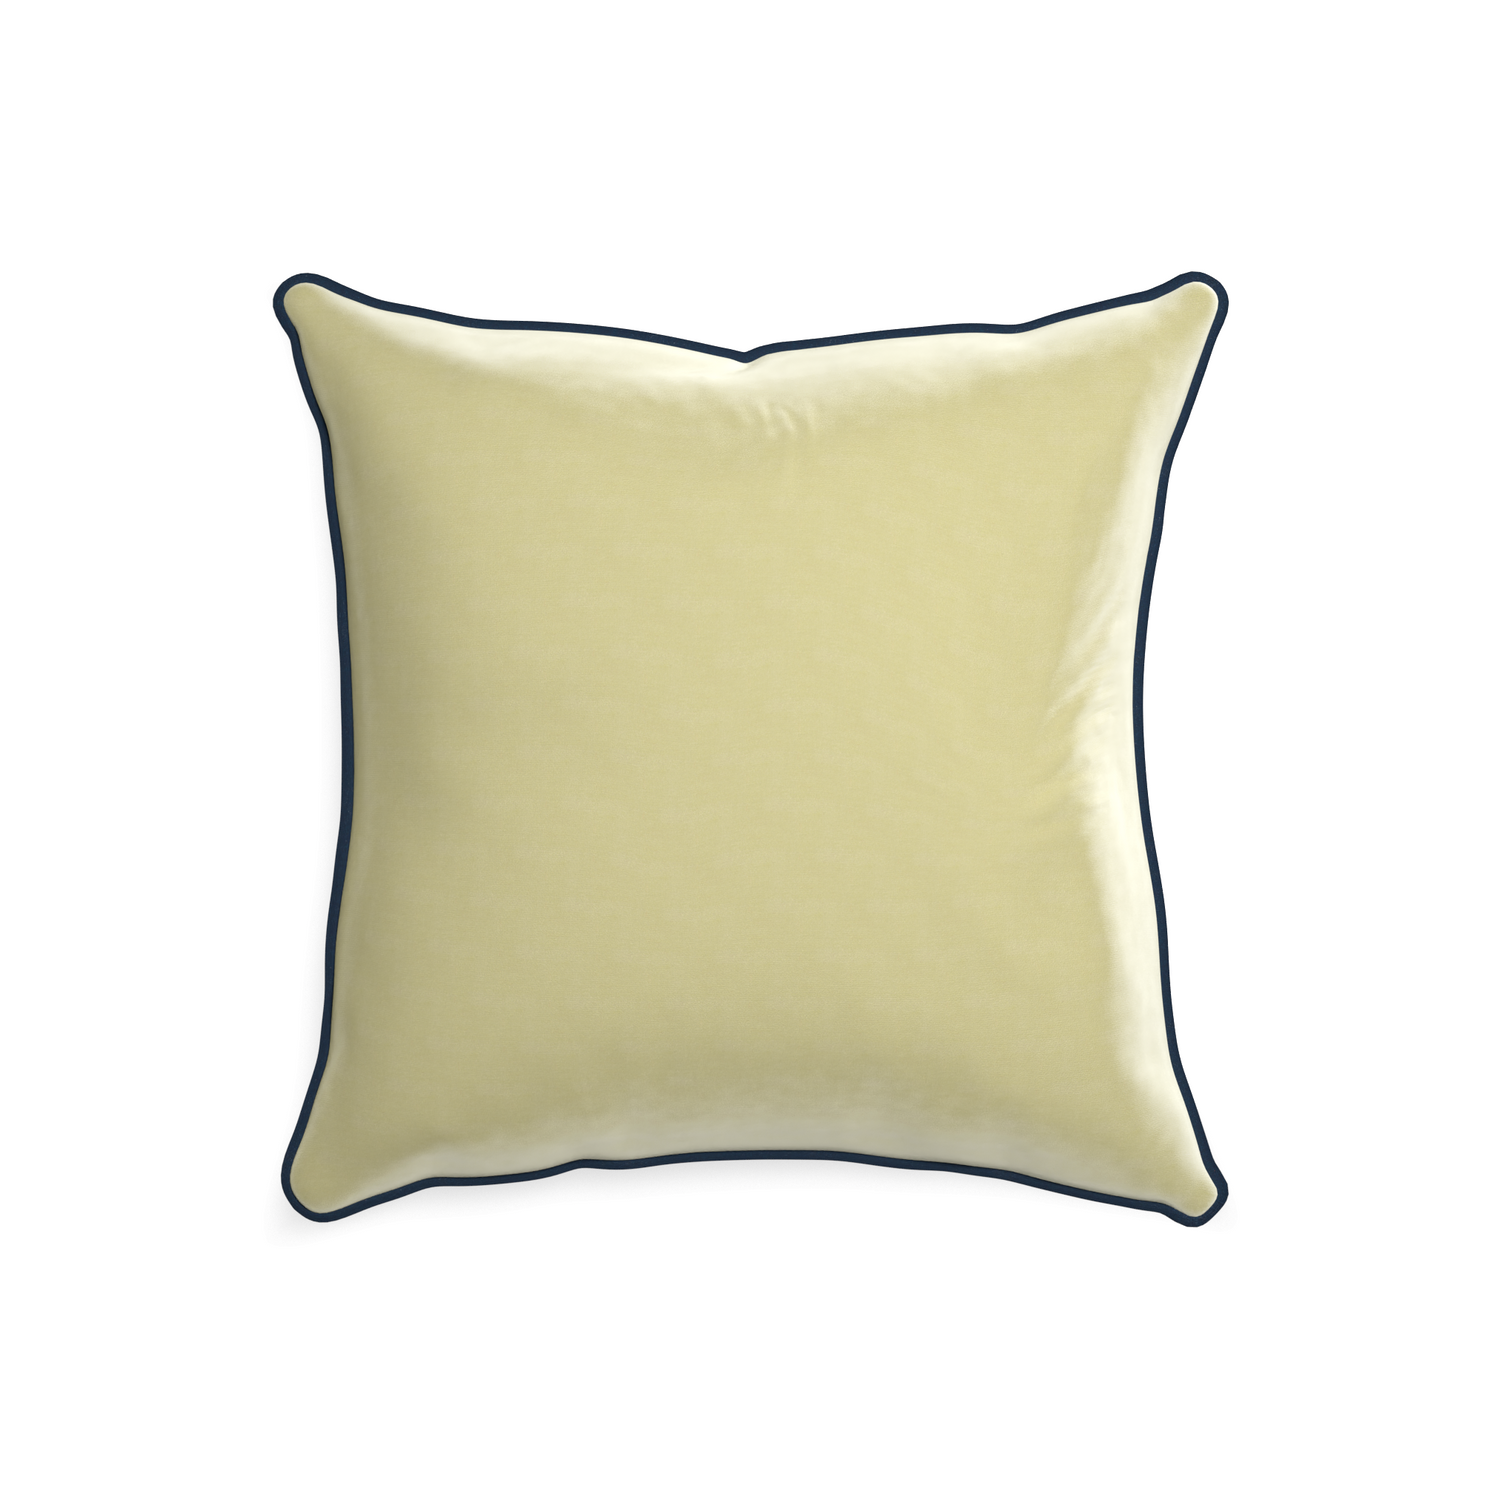 20-square pear velvet custom light greenpillow with c piping on white background